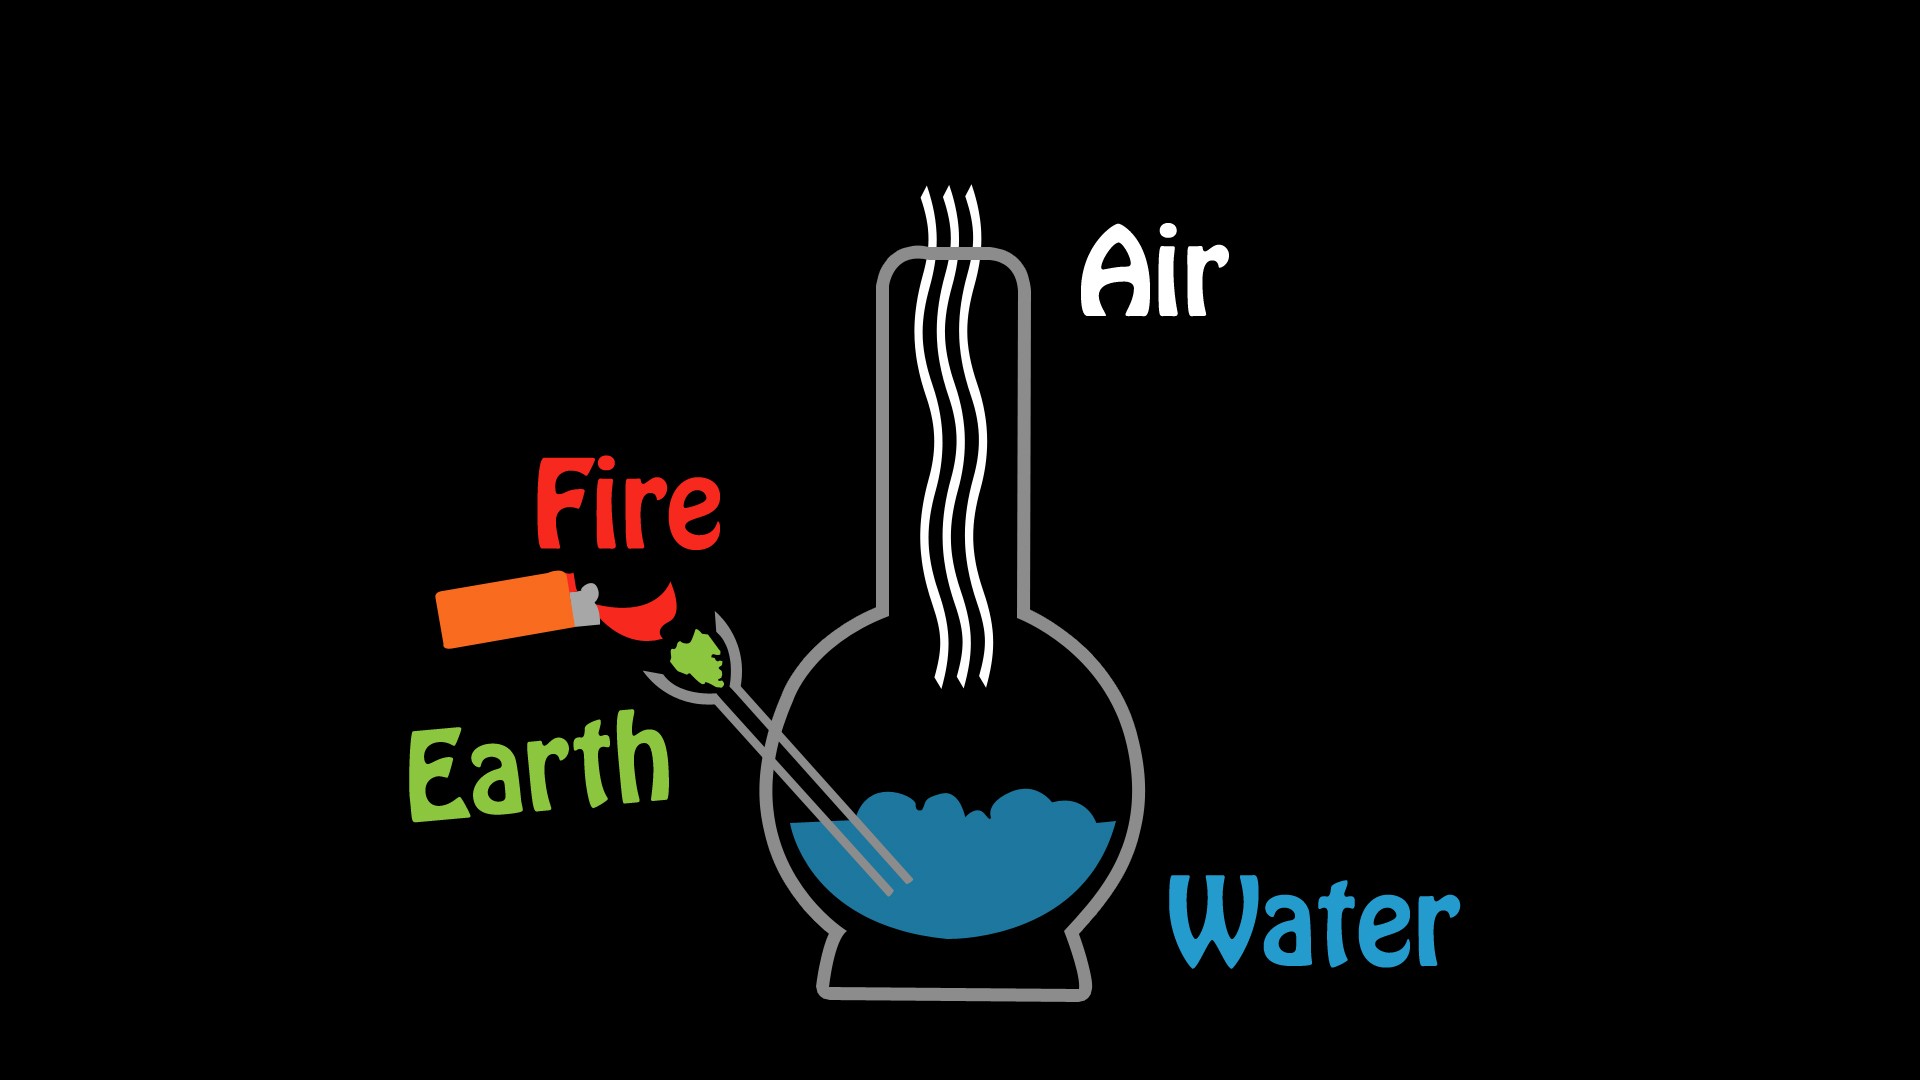 The Elements Of Smoking Wallpaper